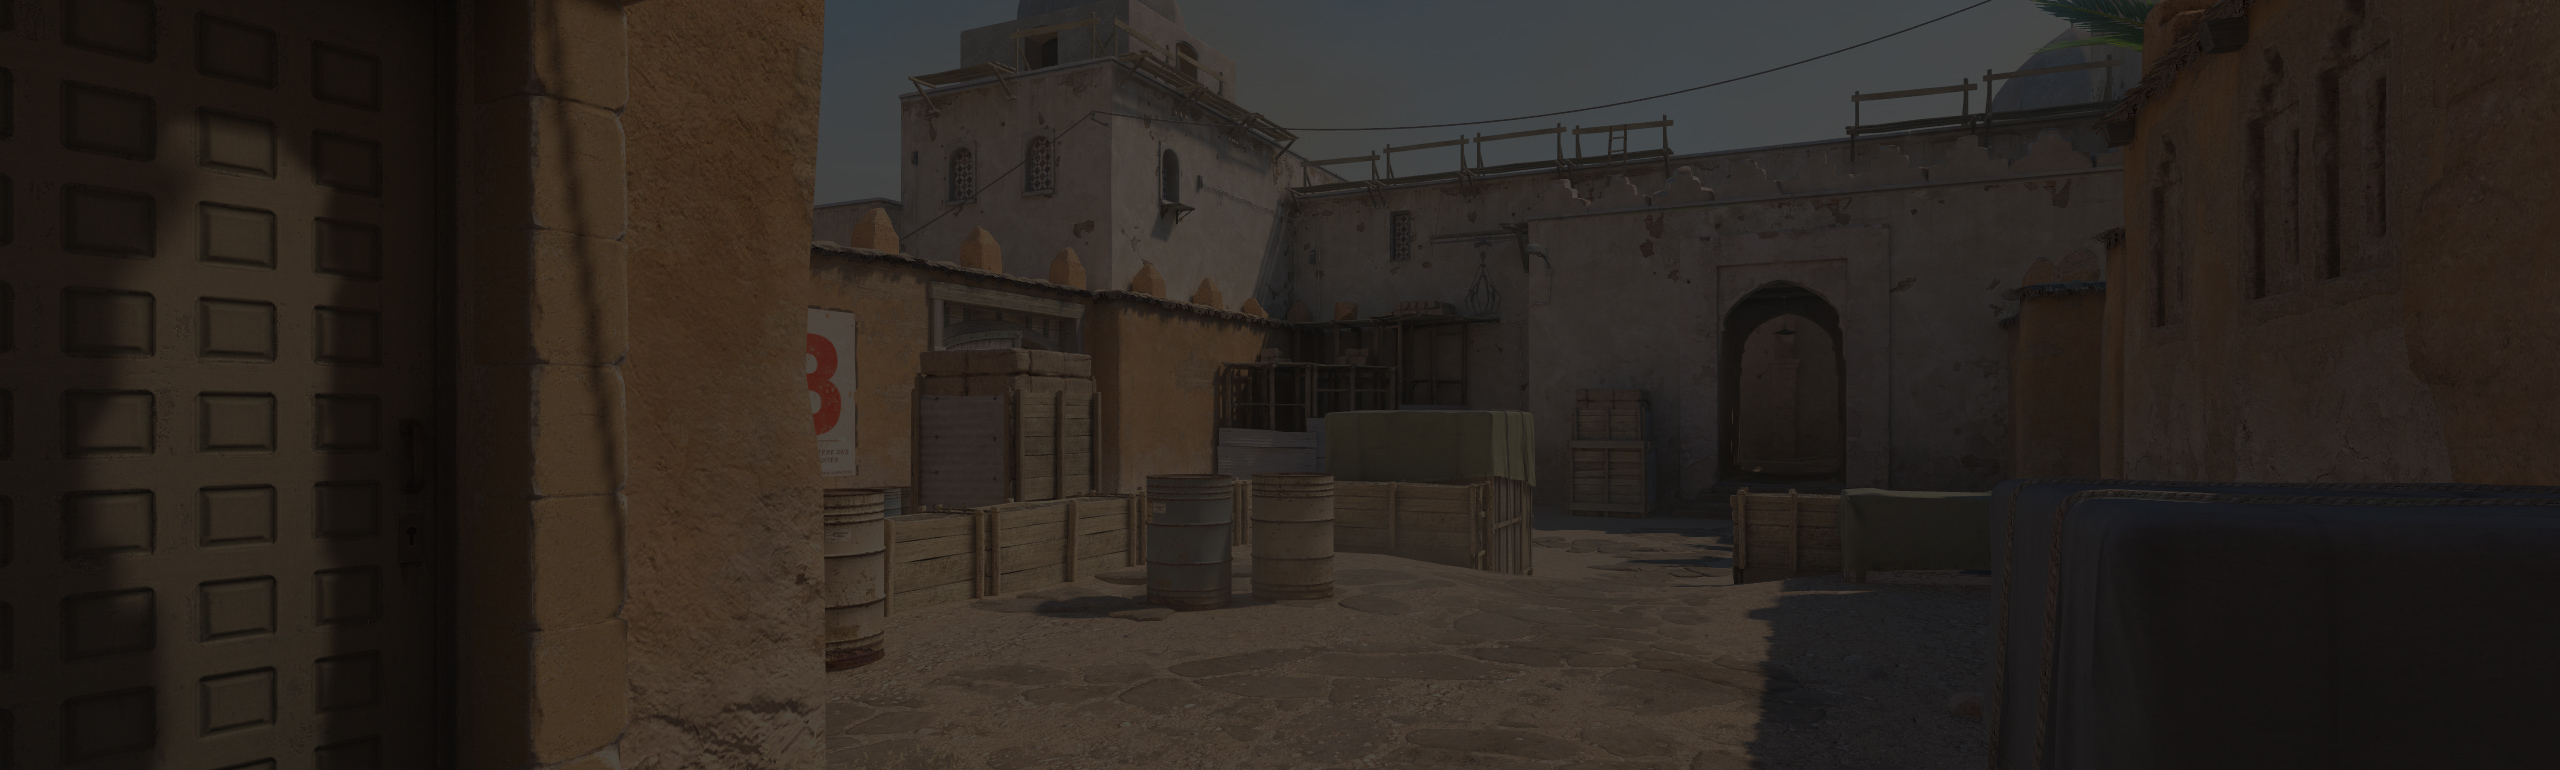 Counter-Strike 2 Sets 240 FPS Sights On NVIDIA's GeForce NOW Cloud Gaming  Service